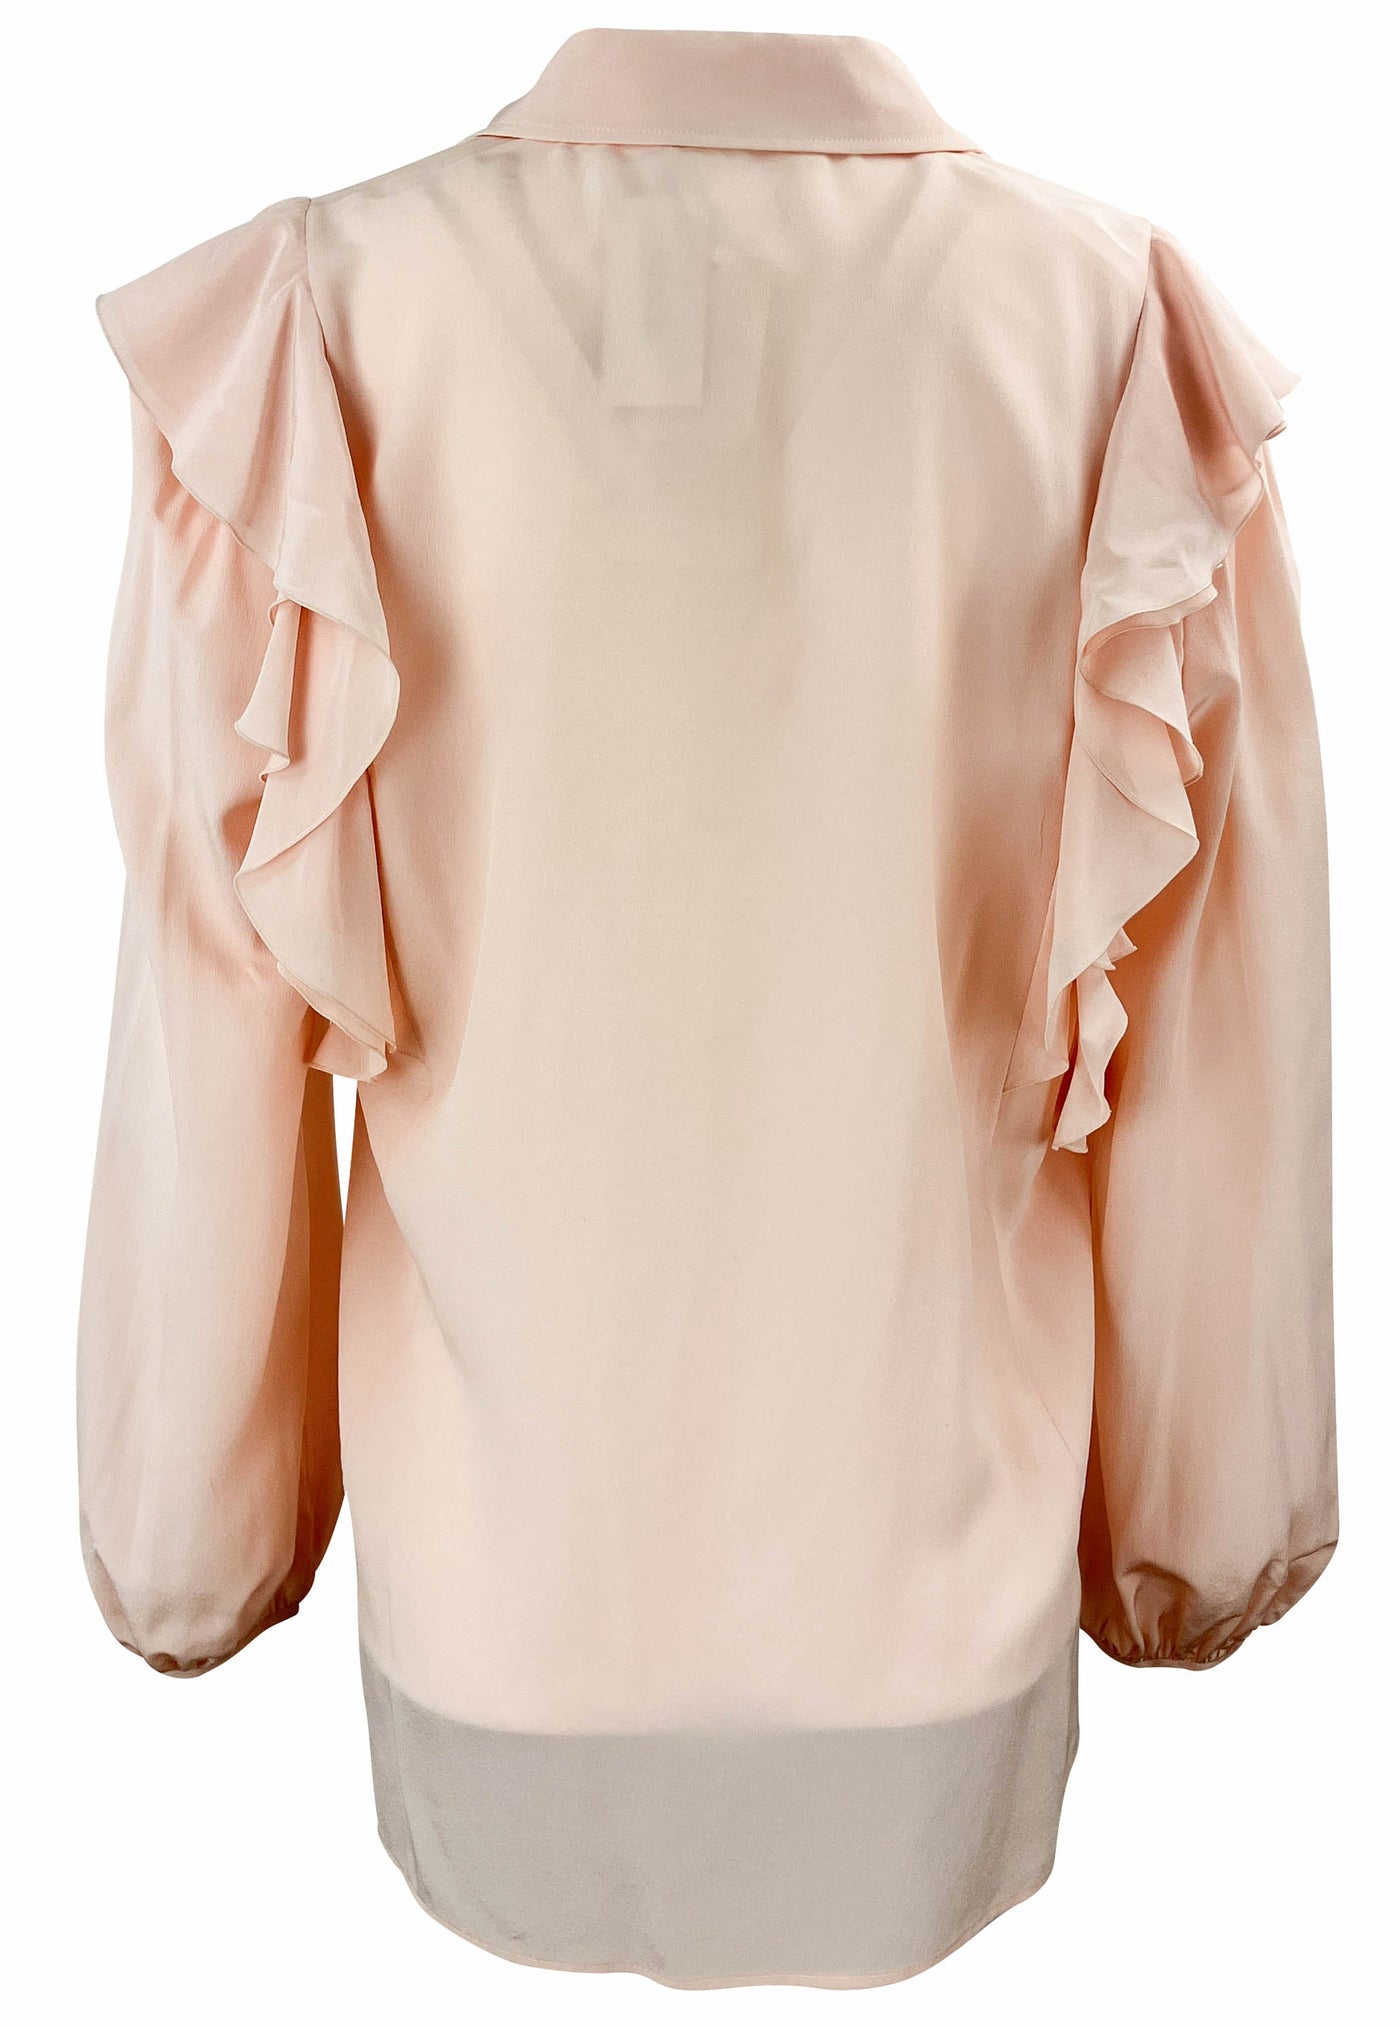 Chloé Ruffle Blouse in Pansy Pink - Discounts on Chloé at UAL